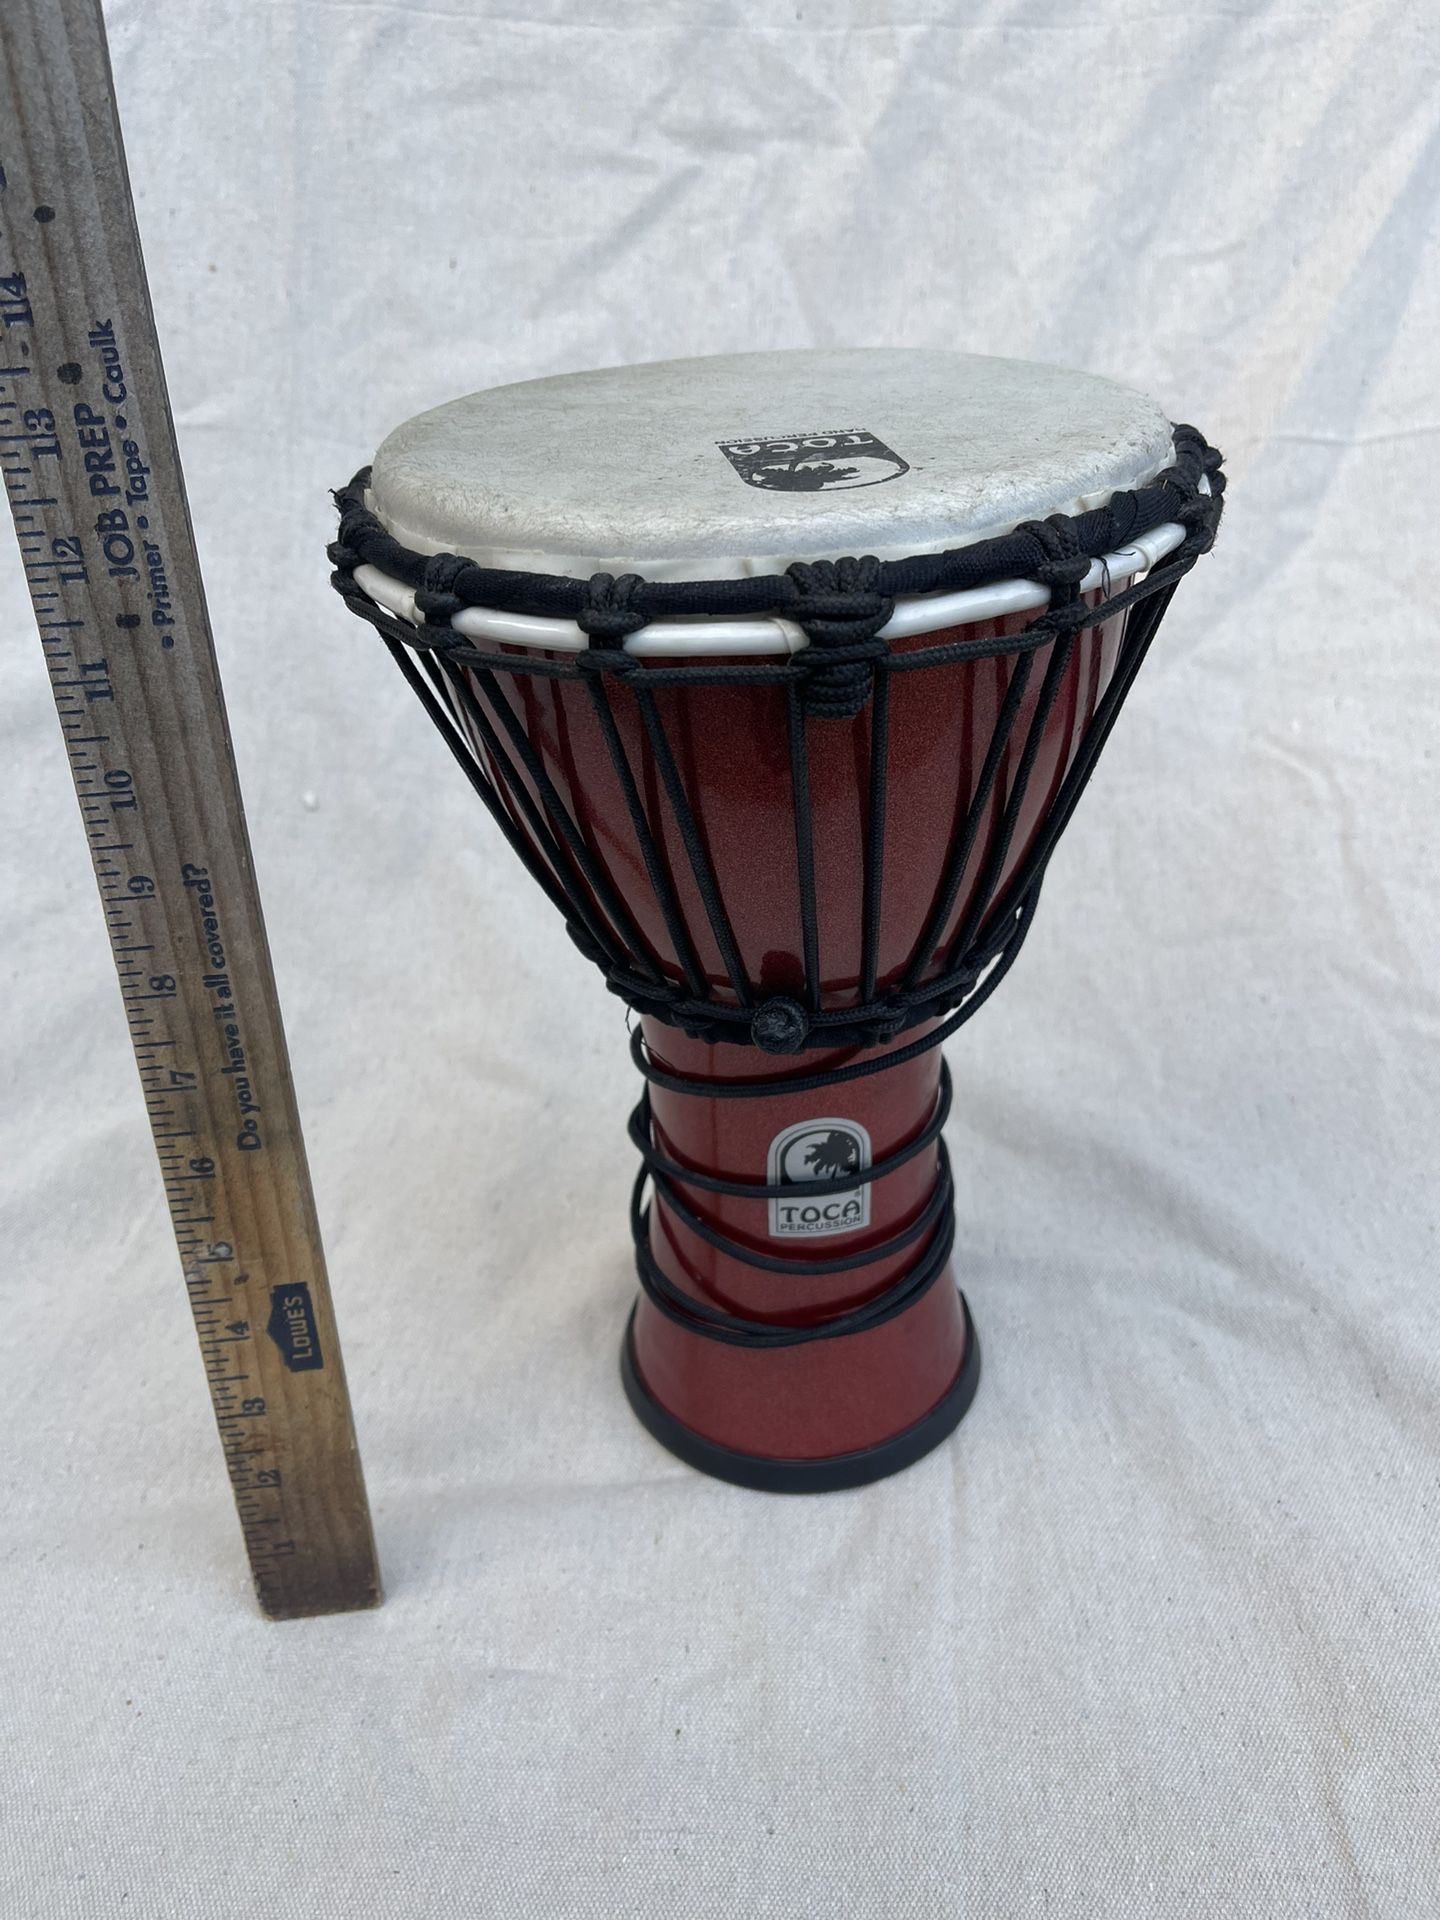 12 Inch Toca Djembe Percussion Drum 